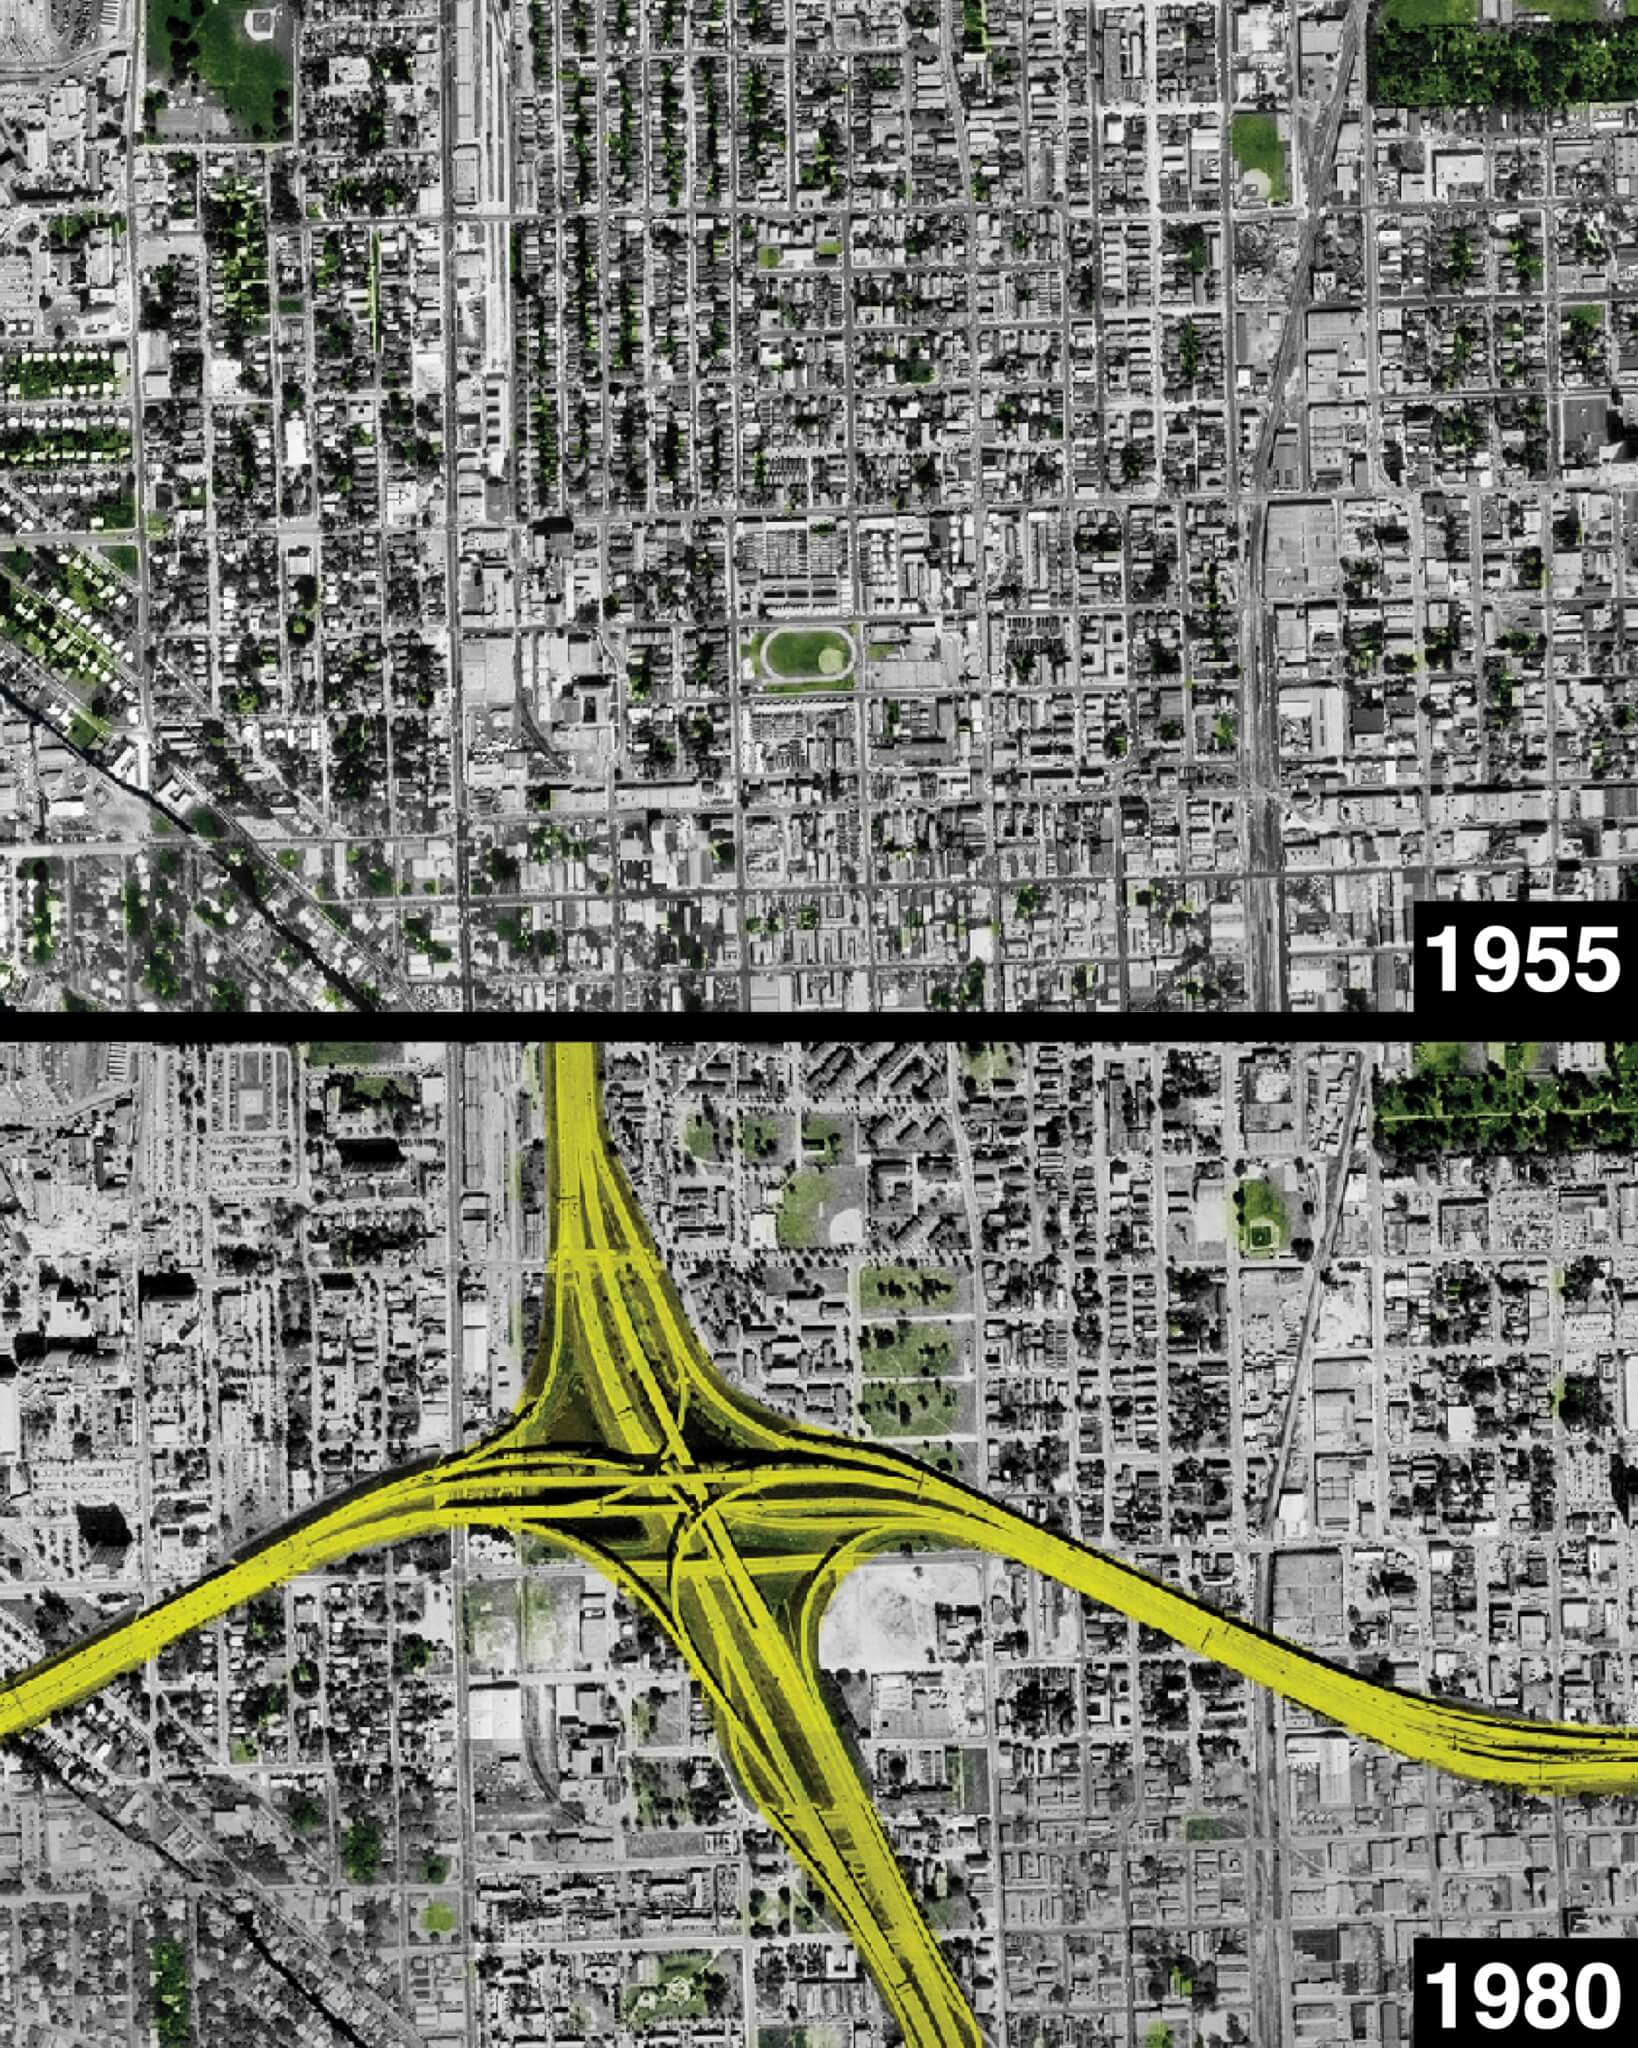 maps depicting the Overtown neighborhood in Miami before and after highway interventions 